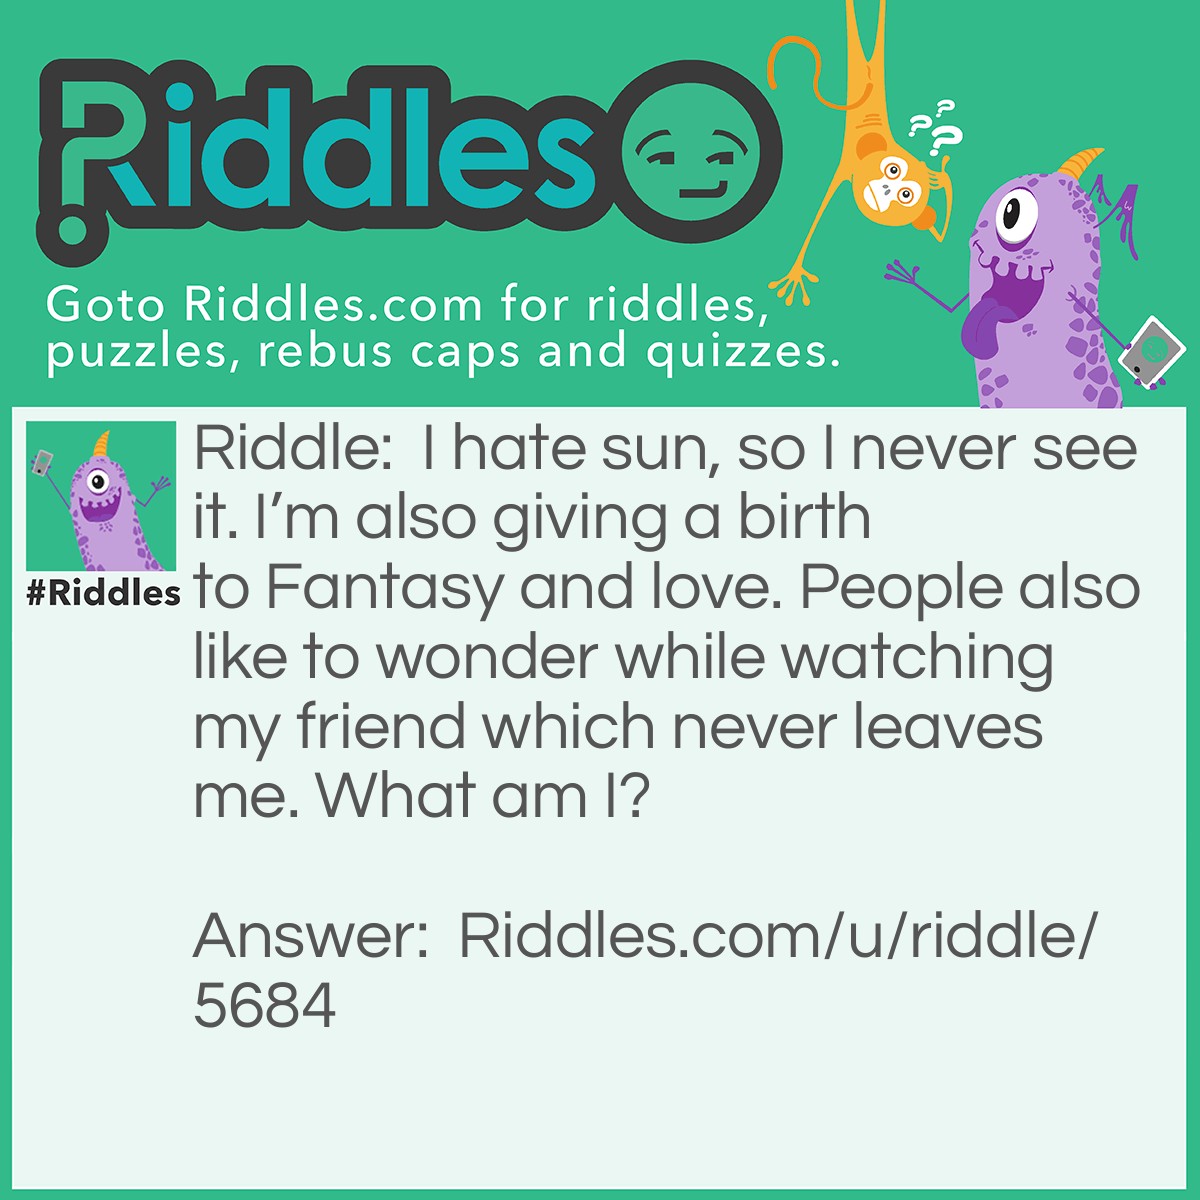 Riddle: I hate sun, so I never see it. I'm also giving a birth to Fantasy and love. People also like to wonder while watching my friend which never leaves me. What am I? Answer: Night.